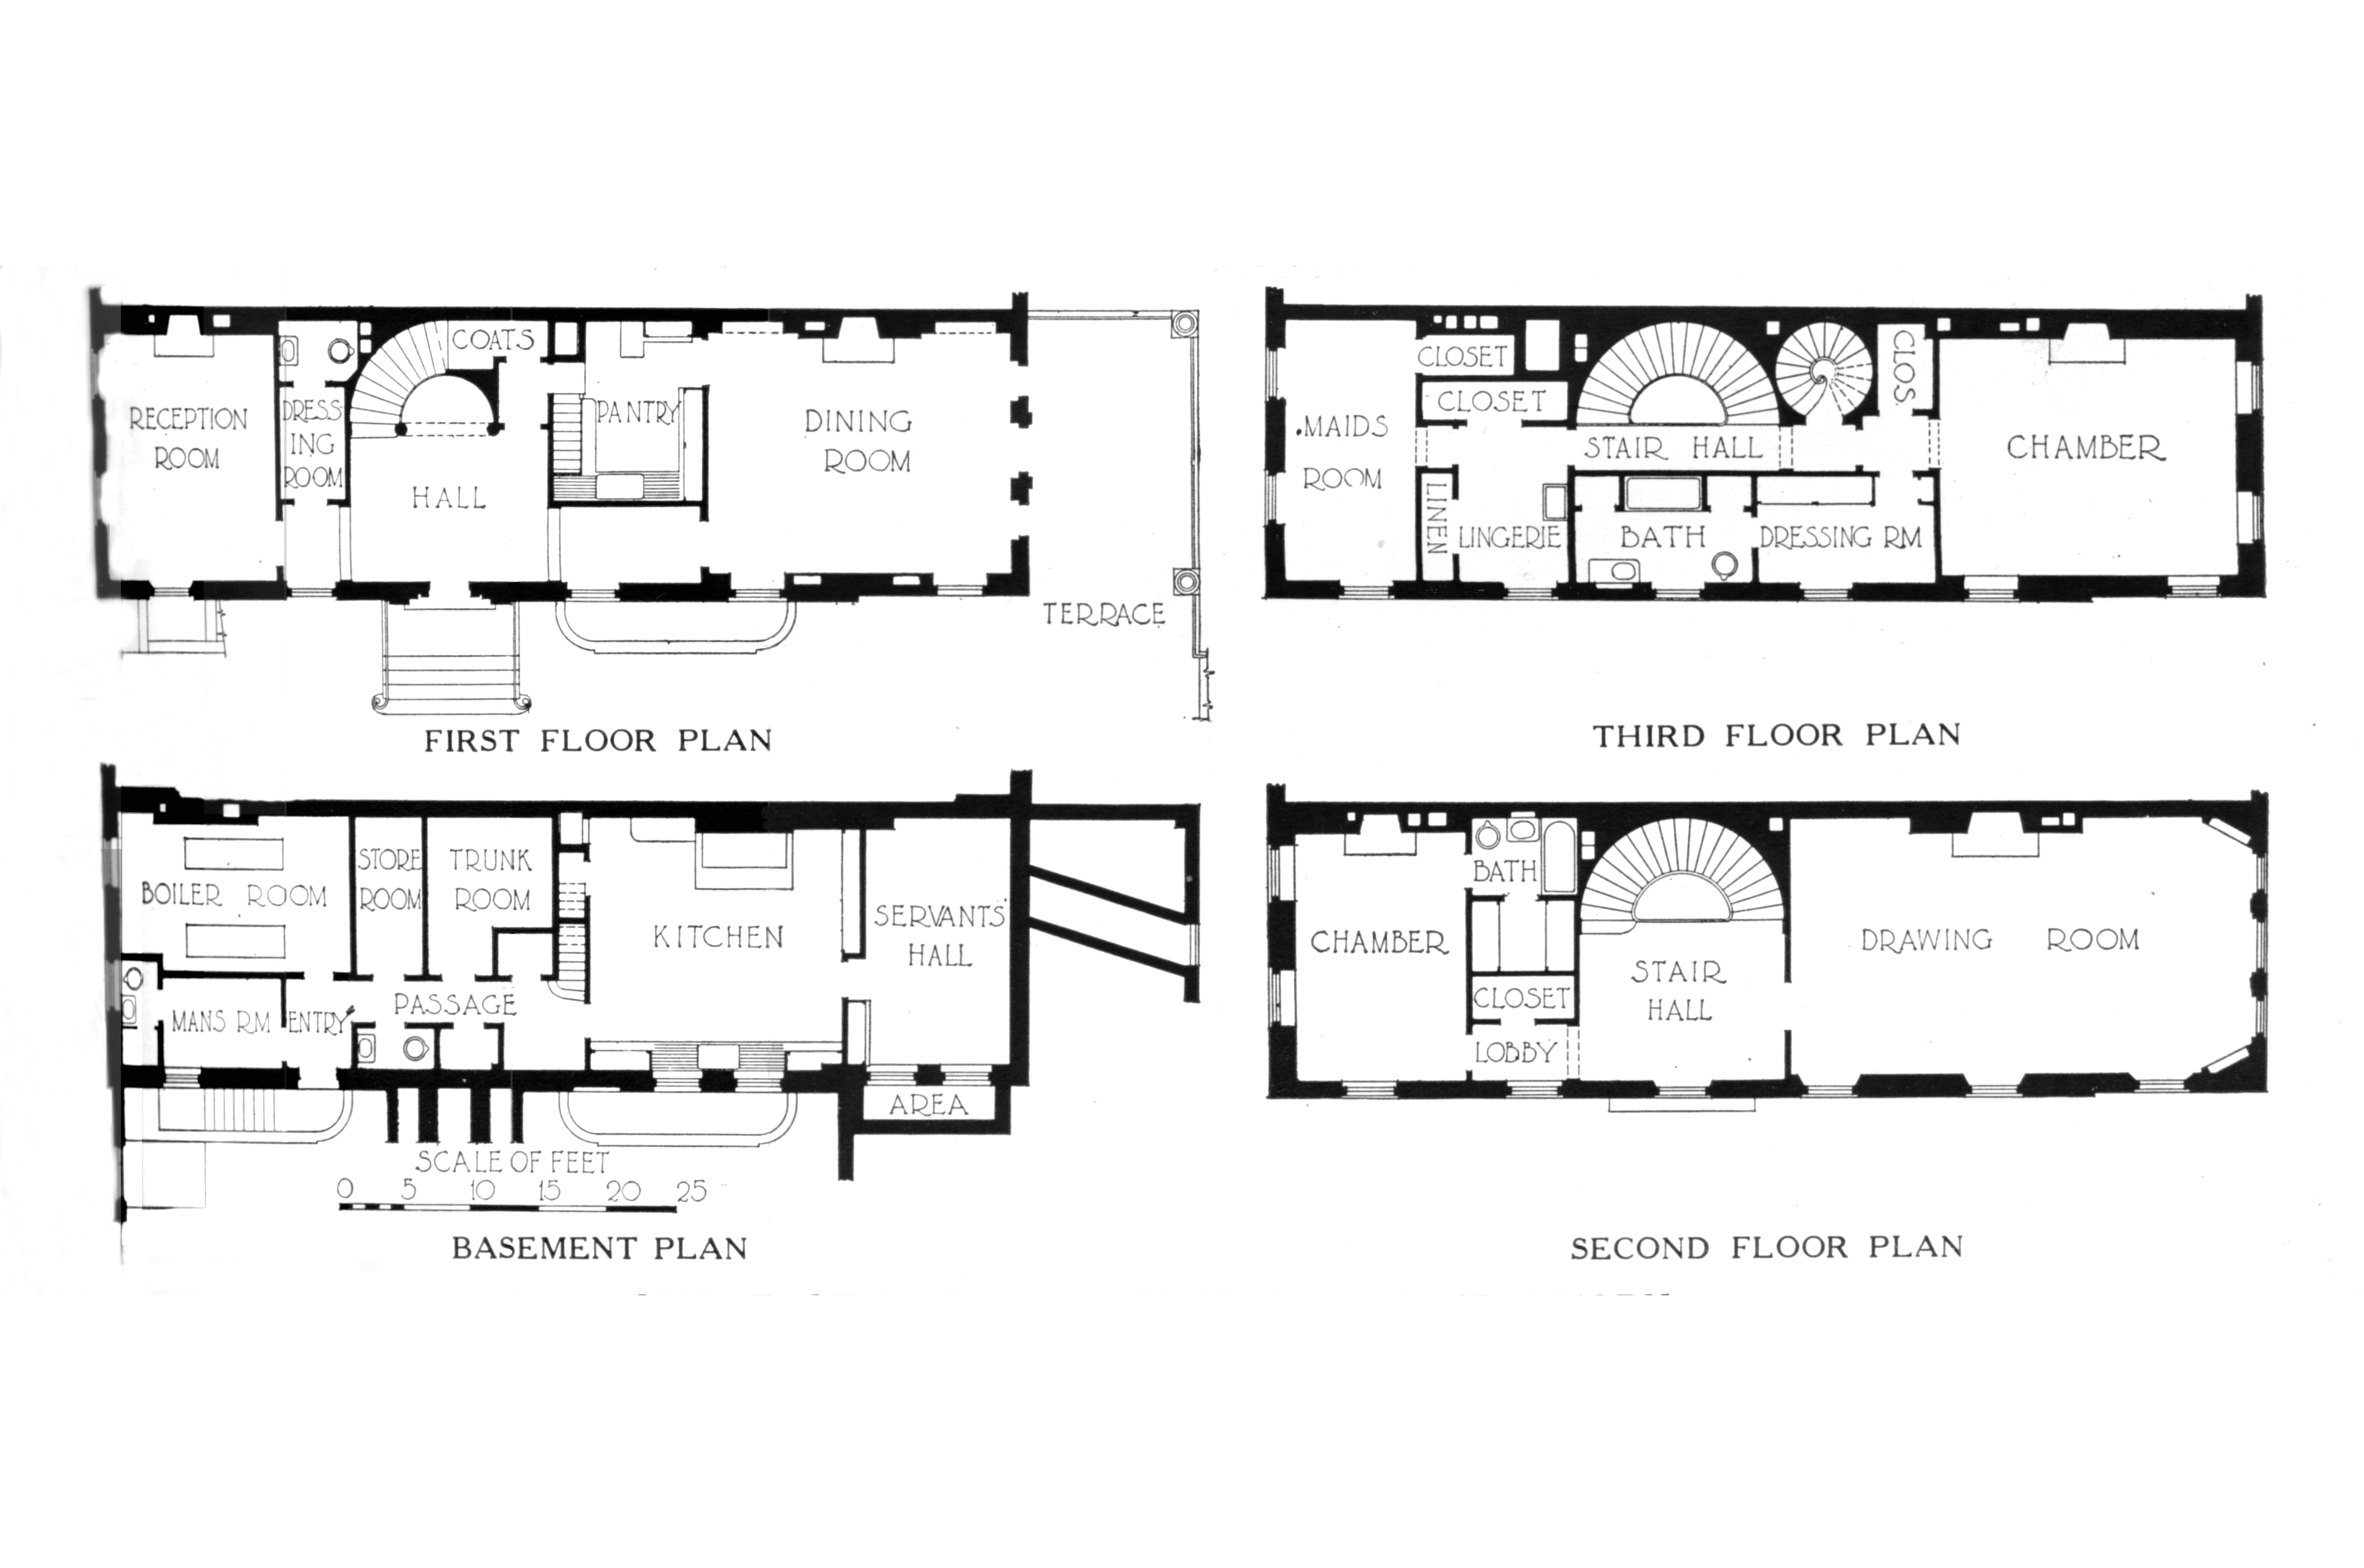 House Plans that Can Be Built for Under 150k Build On A Budget Cut Costs when You Build or Remodel